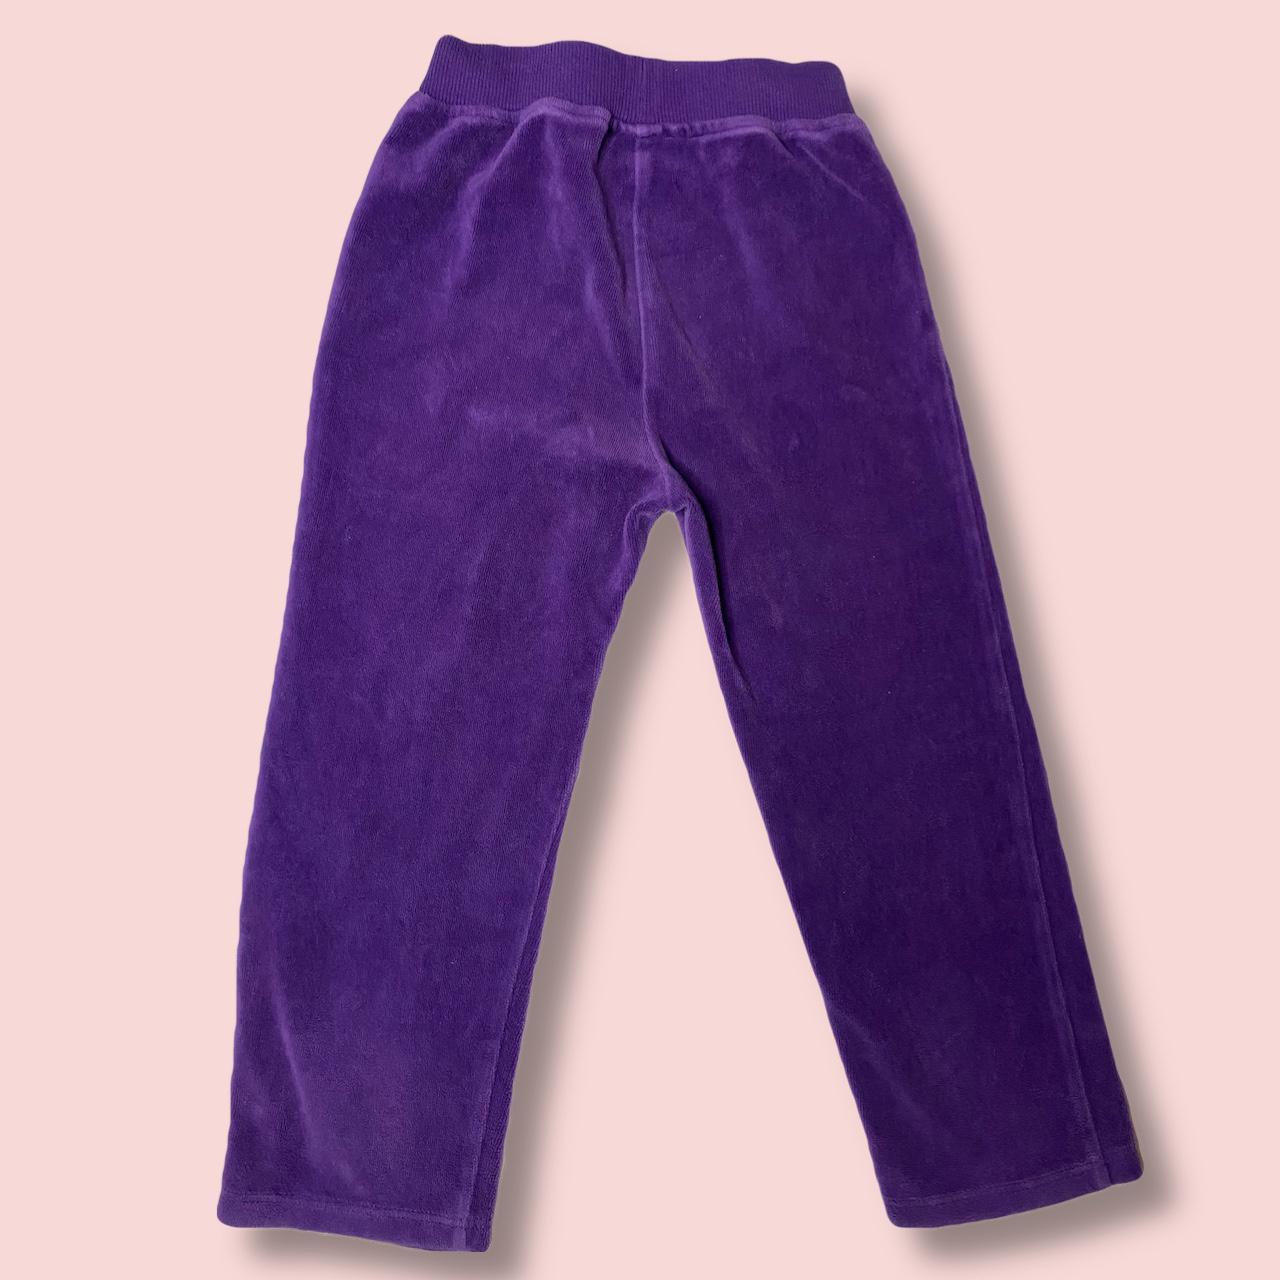 Juicy Couture Purple Joggers-tracksuits (2)